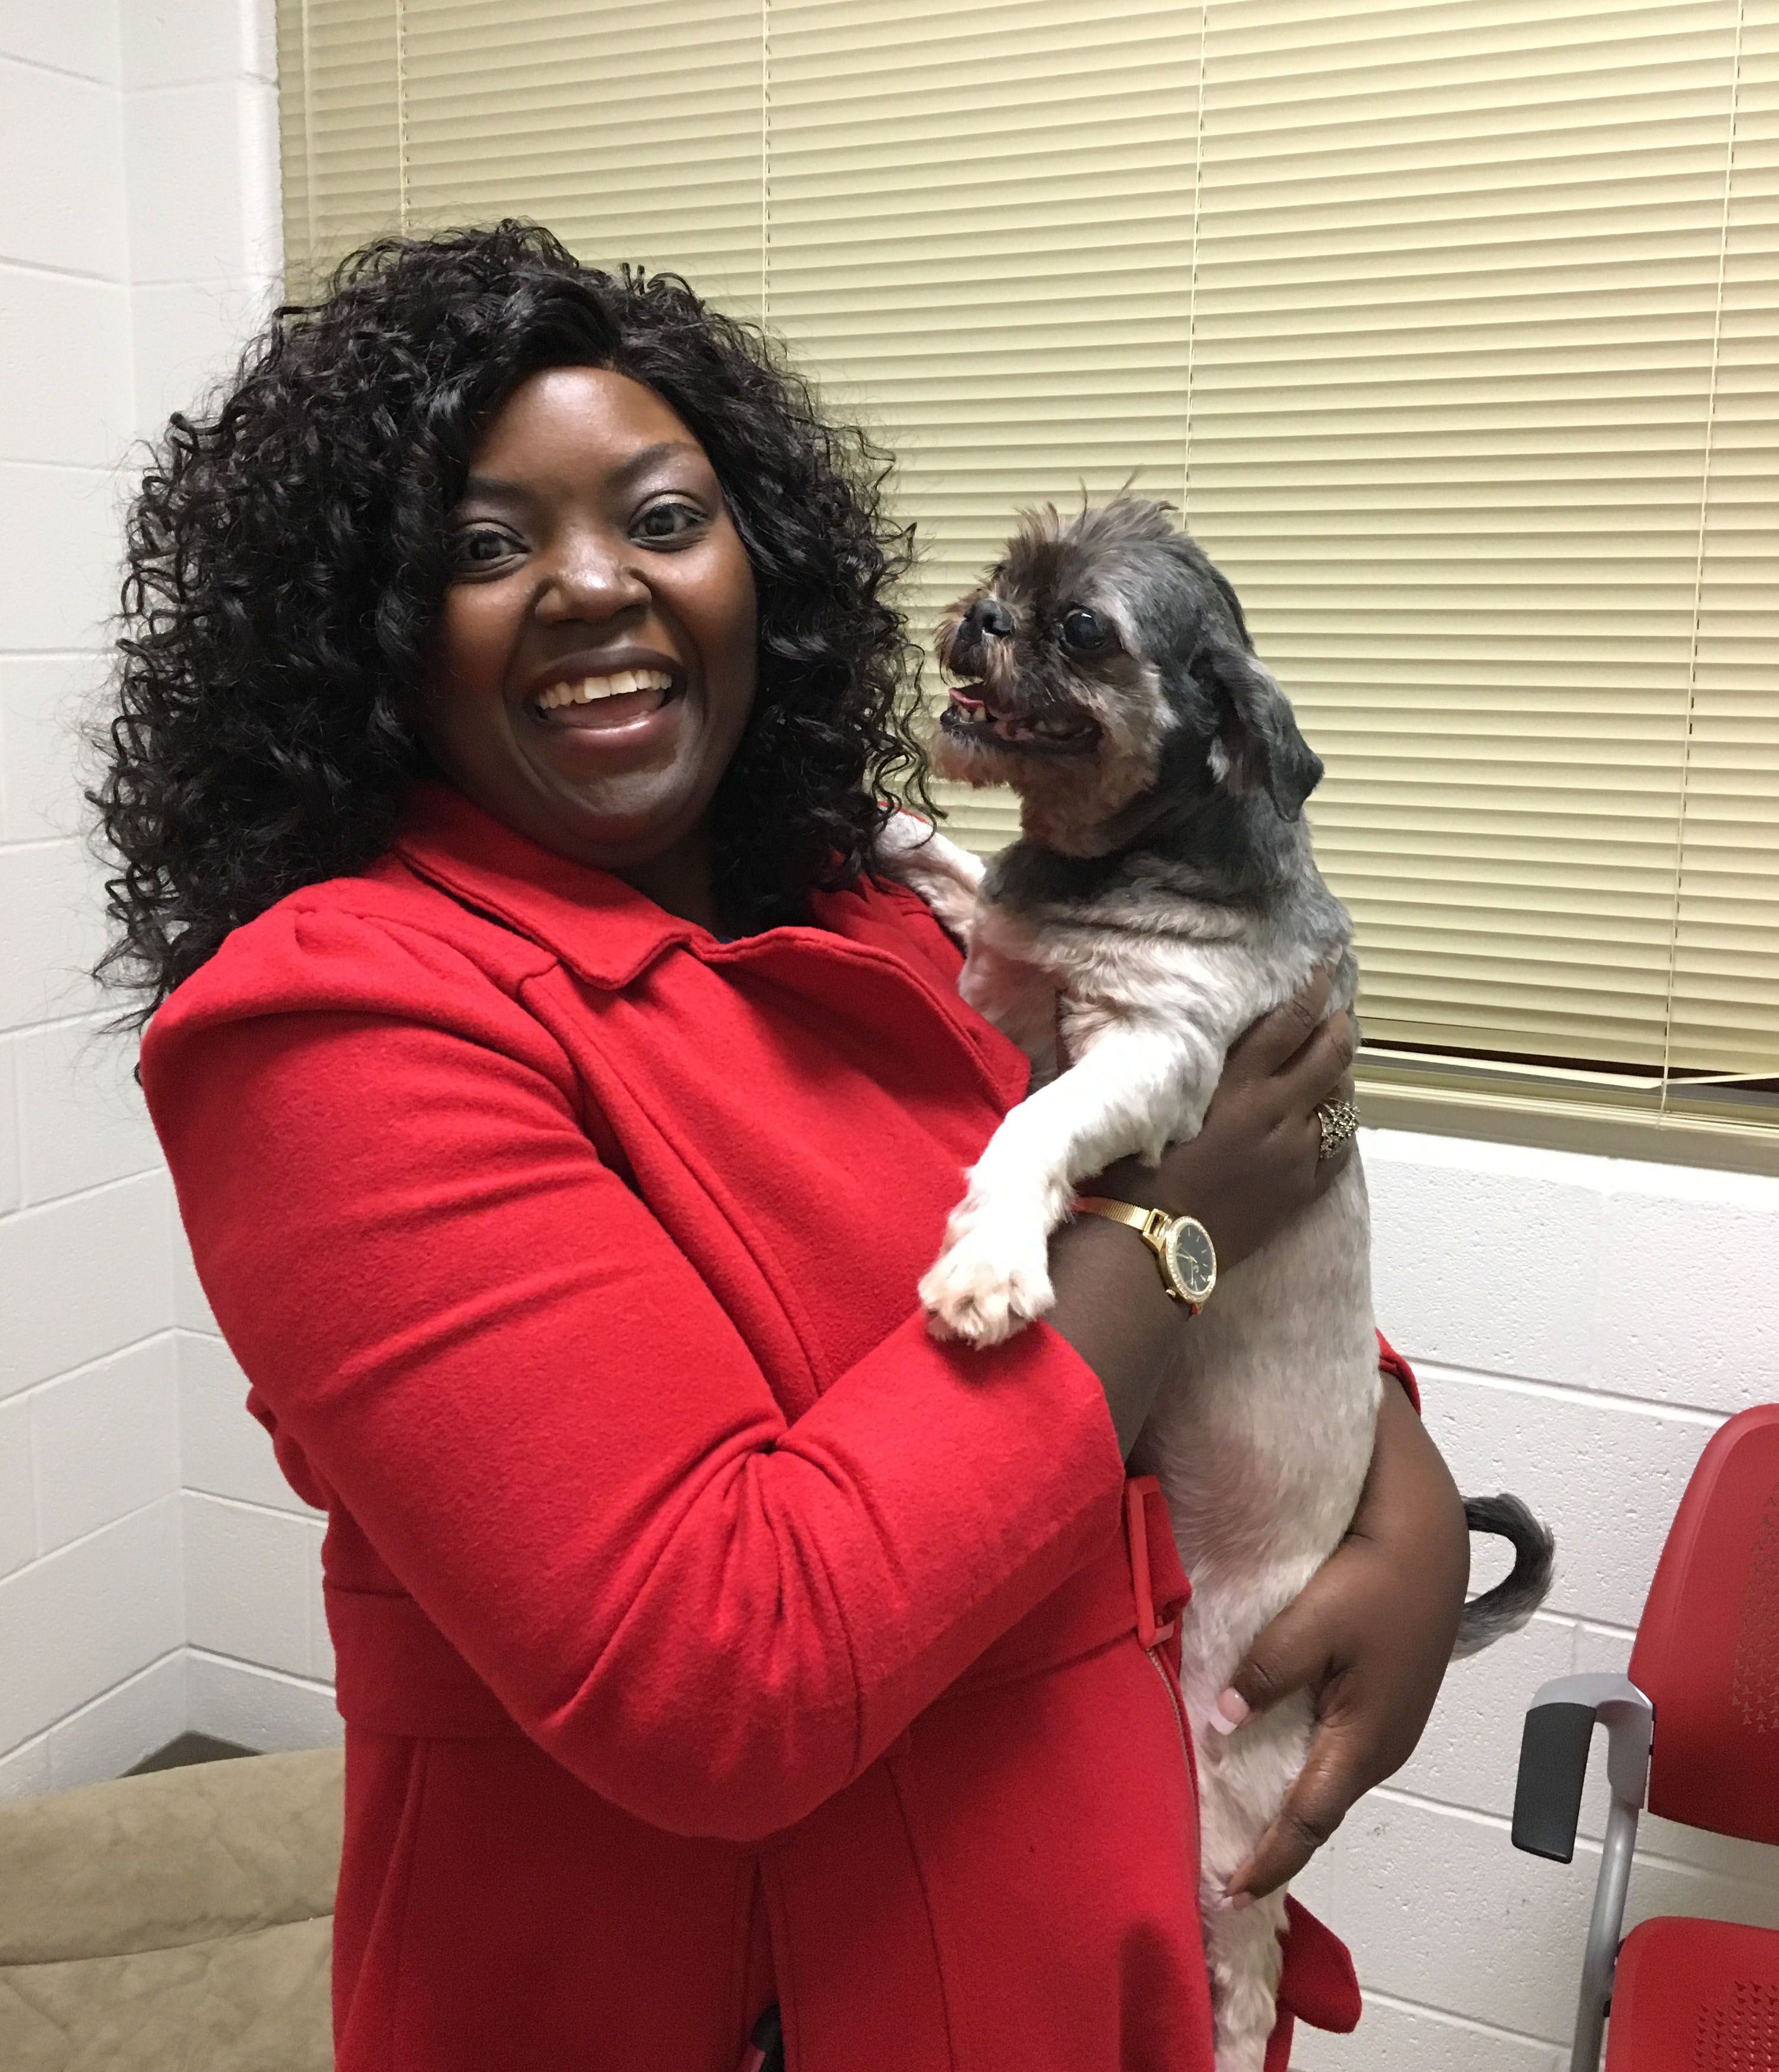 Houston woman reunites with lost dog after one year separation